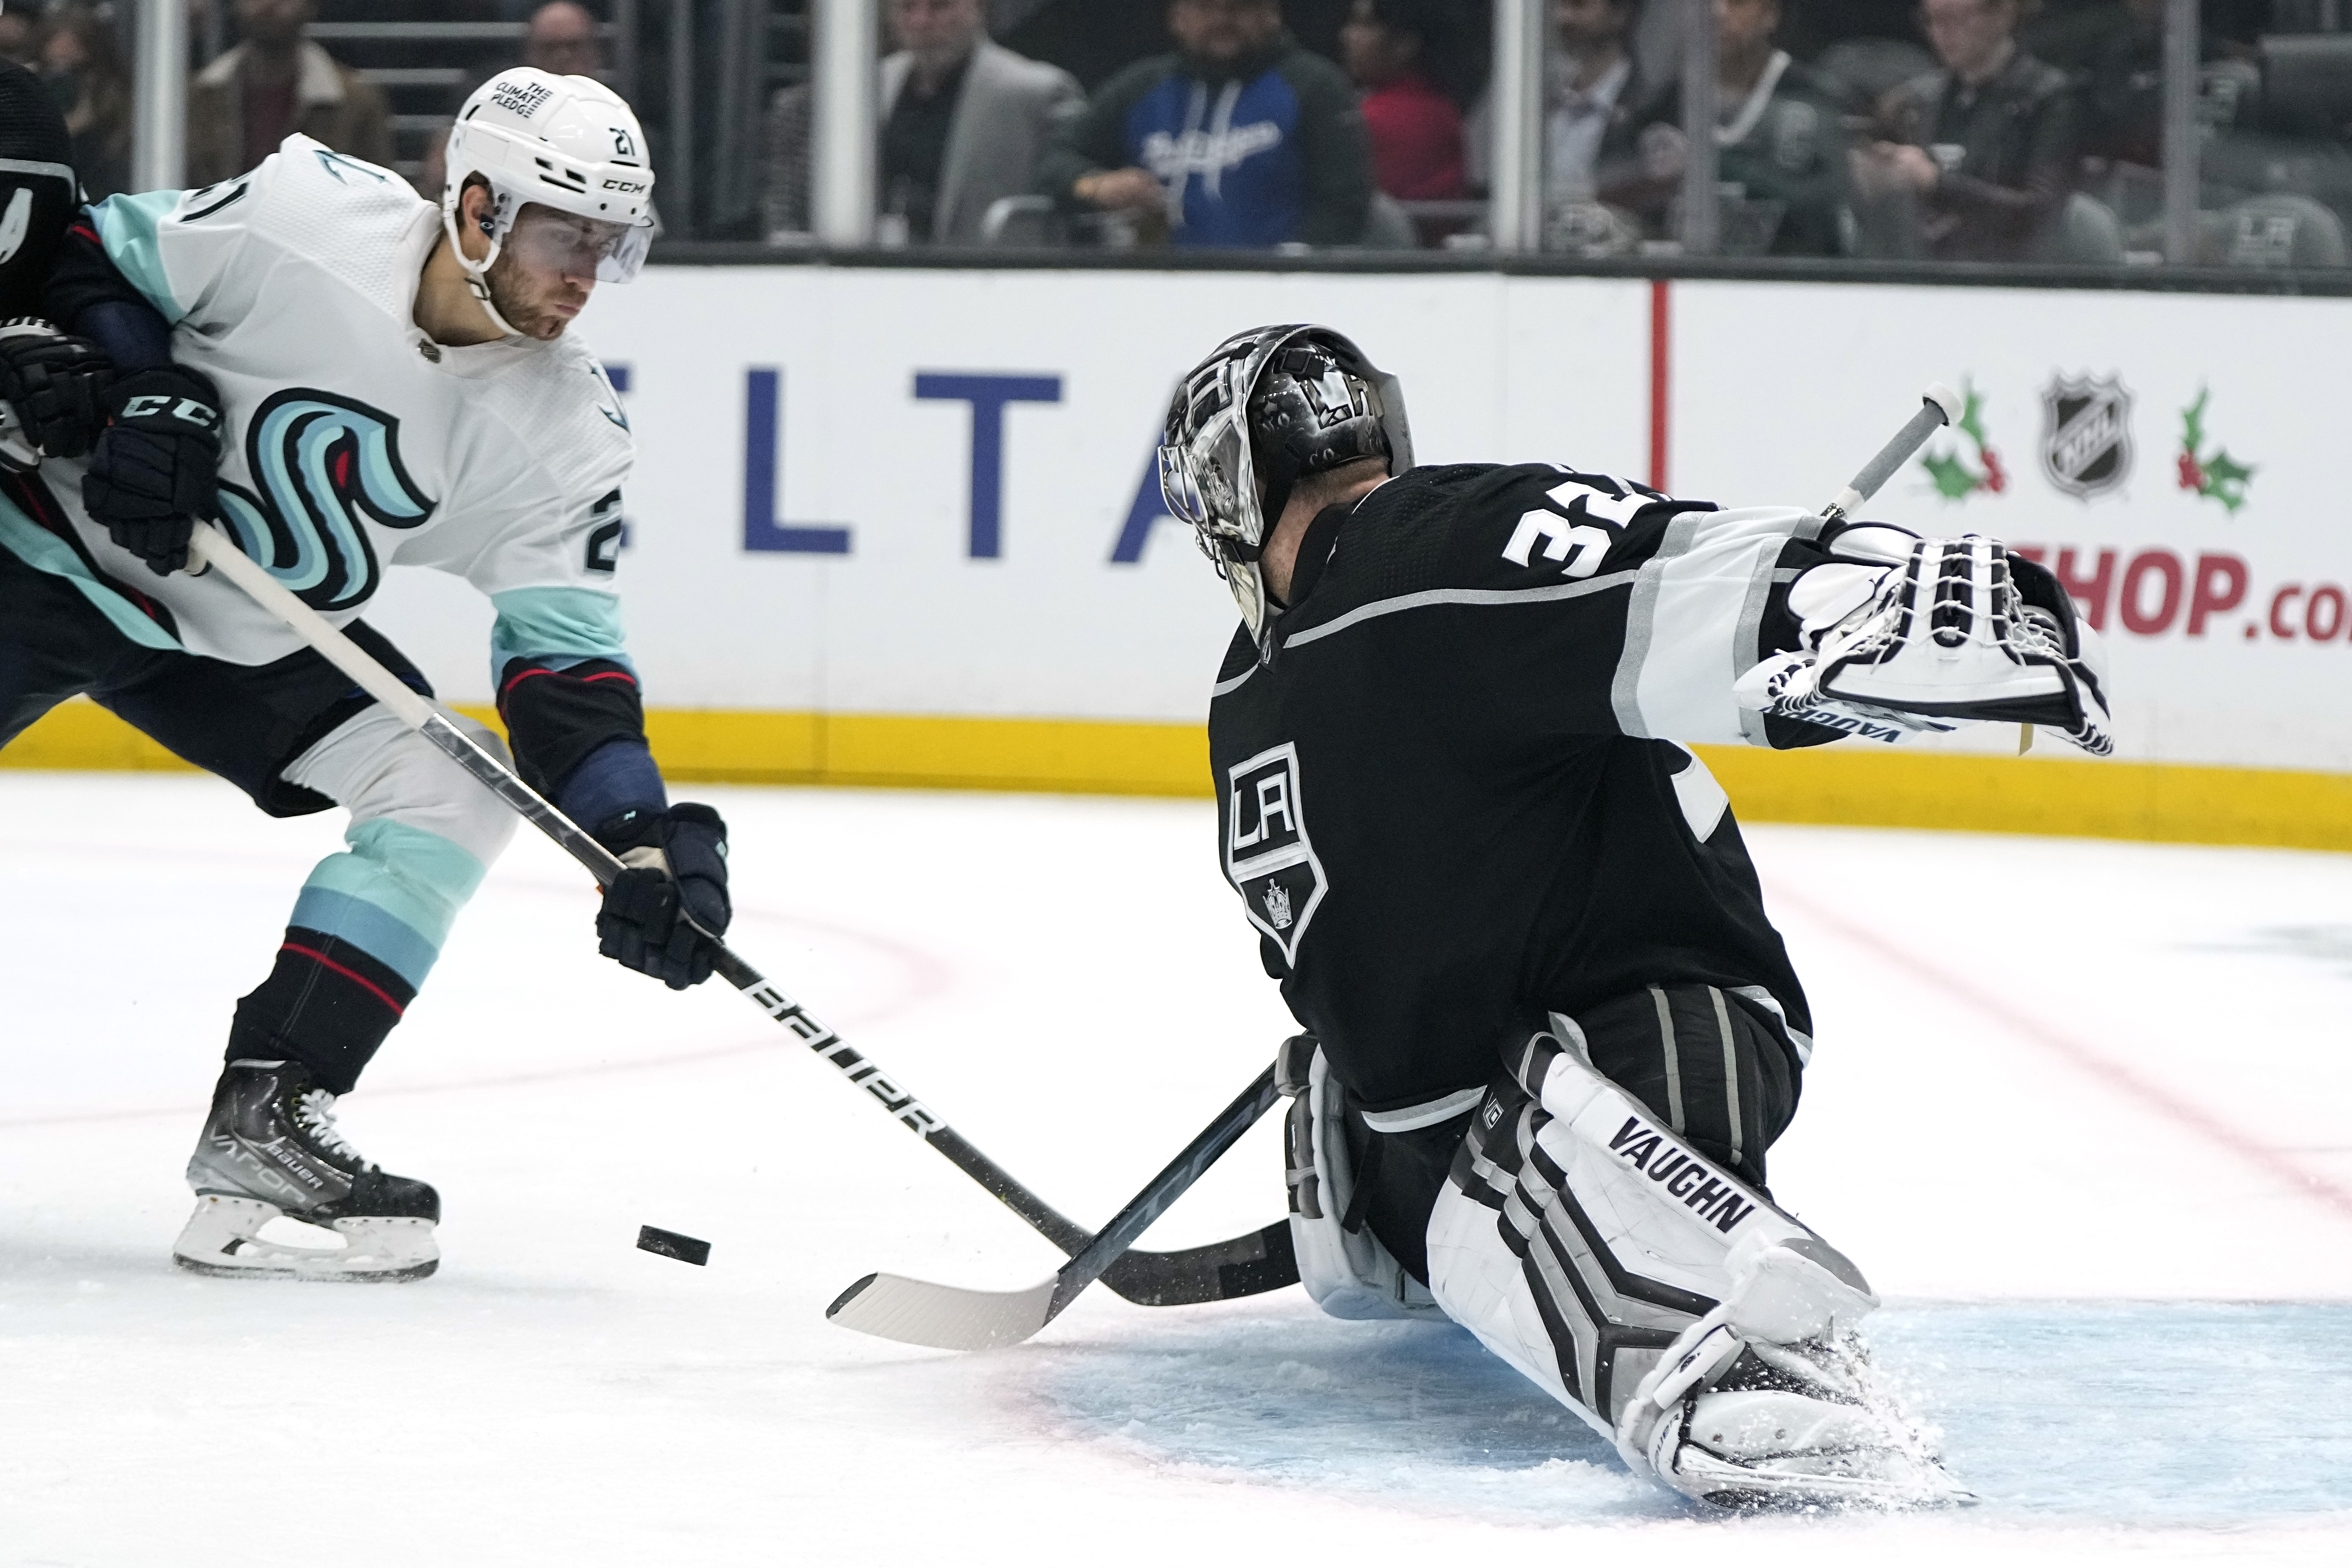 Wennberg's quick goal helps Kraken to 6-1 victory over Kings - The